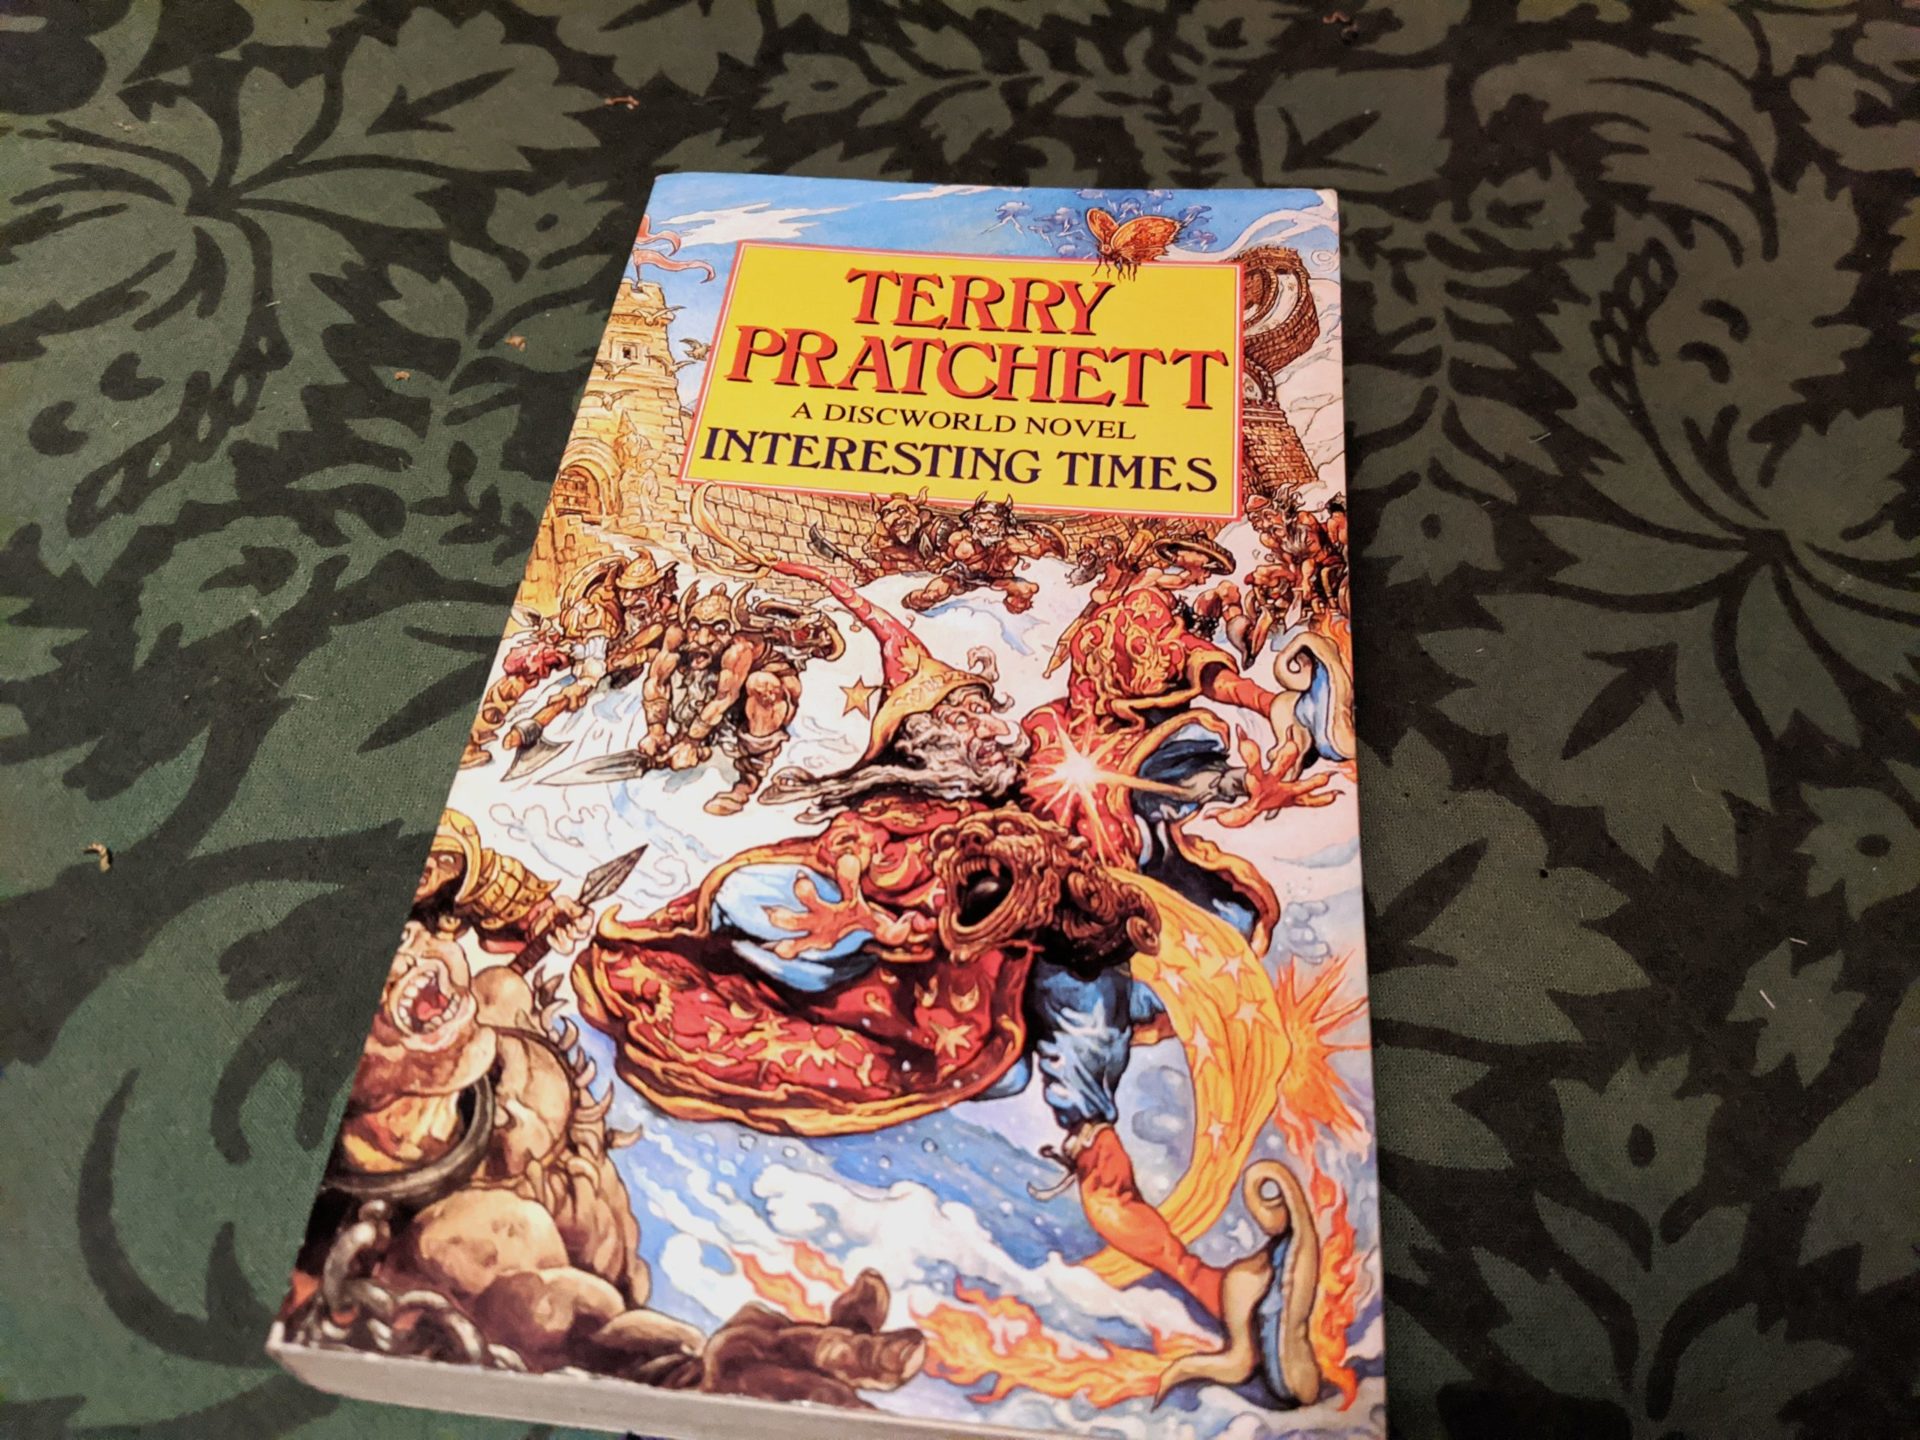 The cover of Terry Pratchett's discworld novel "Interesting Times" (Photo by Jock Busuttil / Product People Limited)